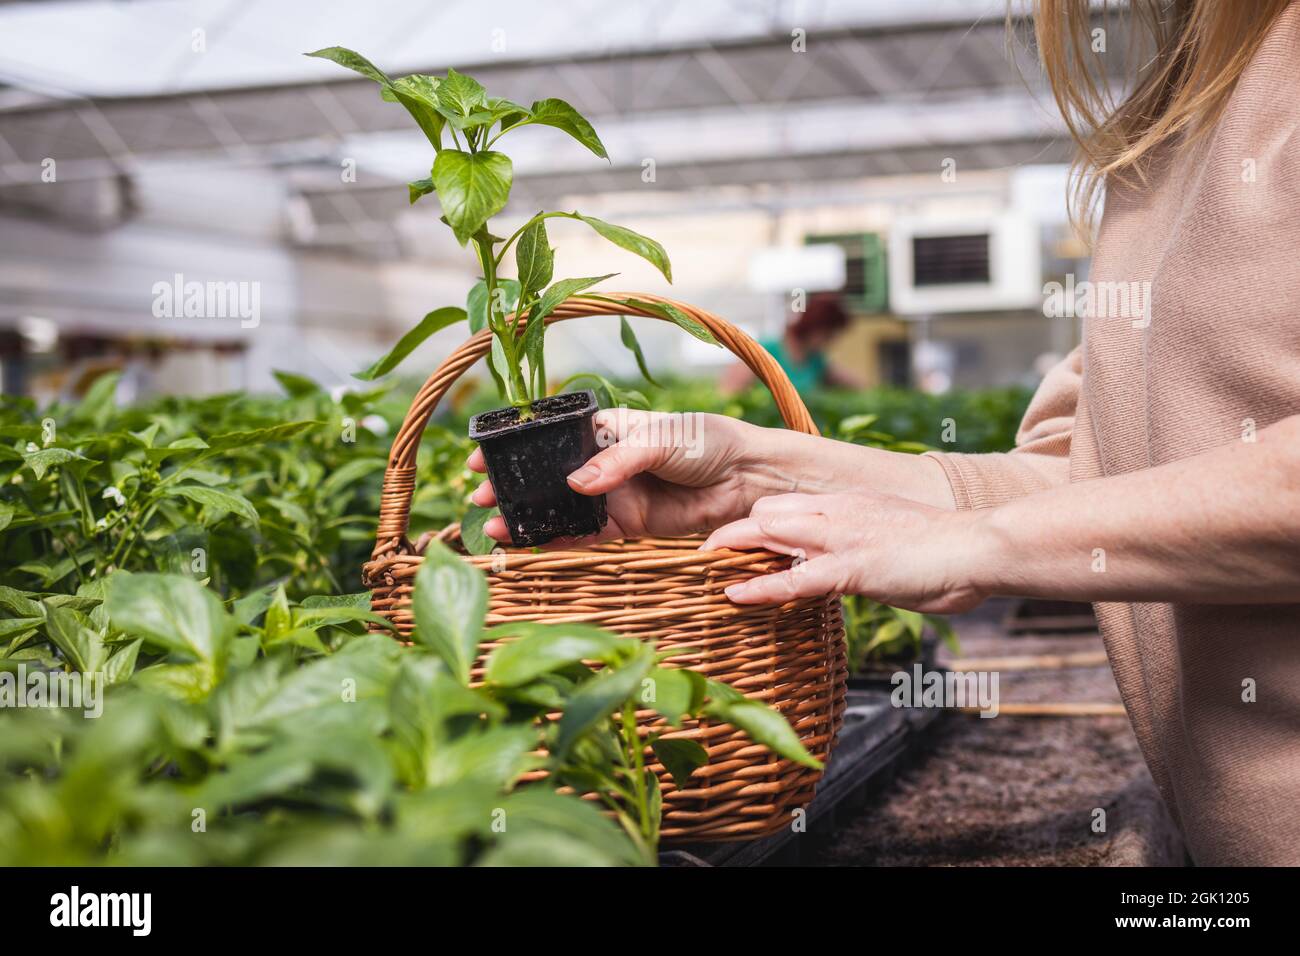 Woman shopping peppers seedling at plant nursery. Customer choosing and buying vegetable plants from organic farm greenhouse Stock Photo